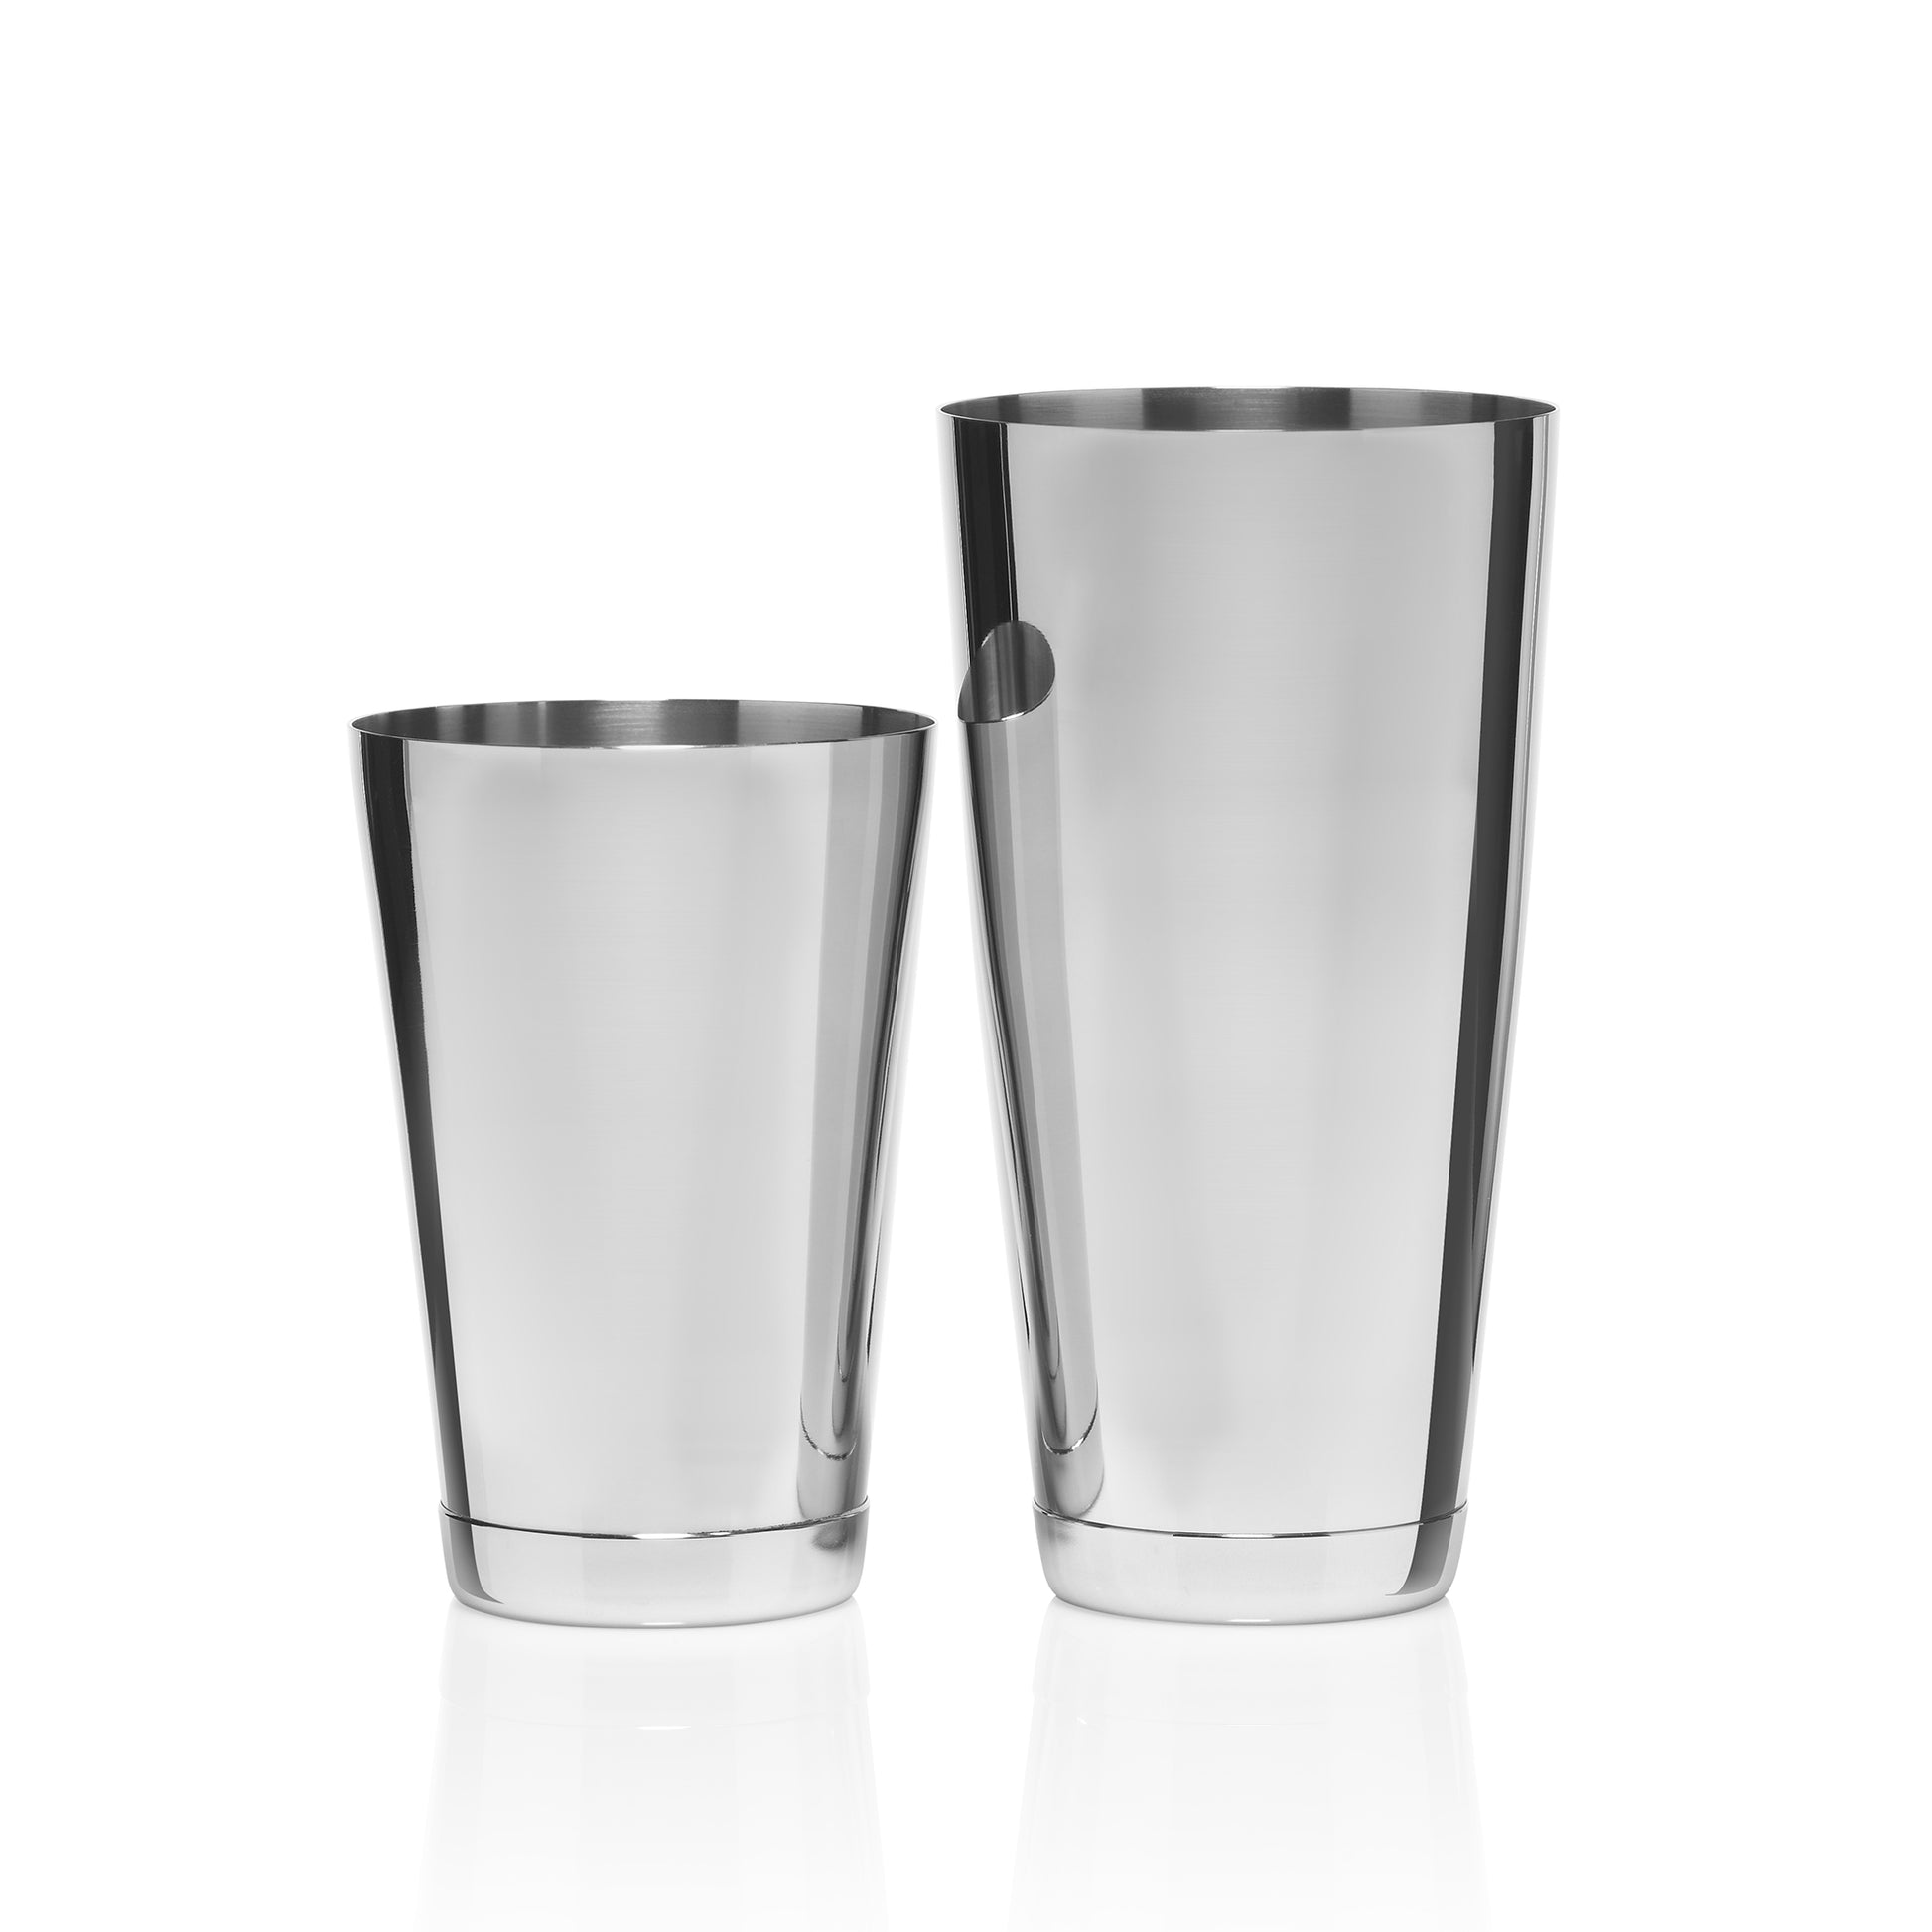 Cocktail Shaker - 3 Piece 16 Ounce - Stainless Steel w/ Base